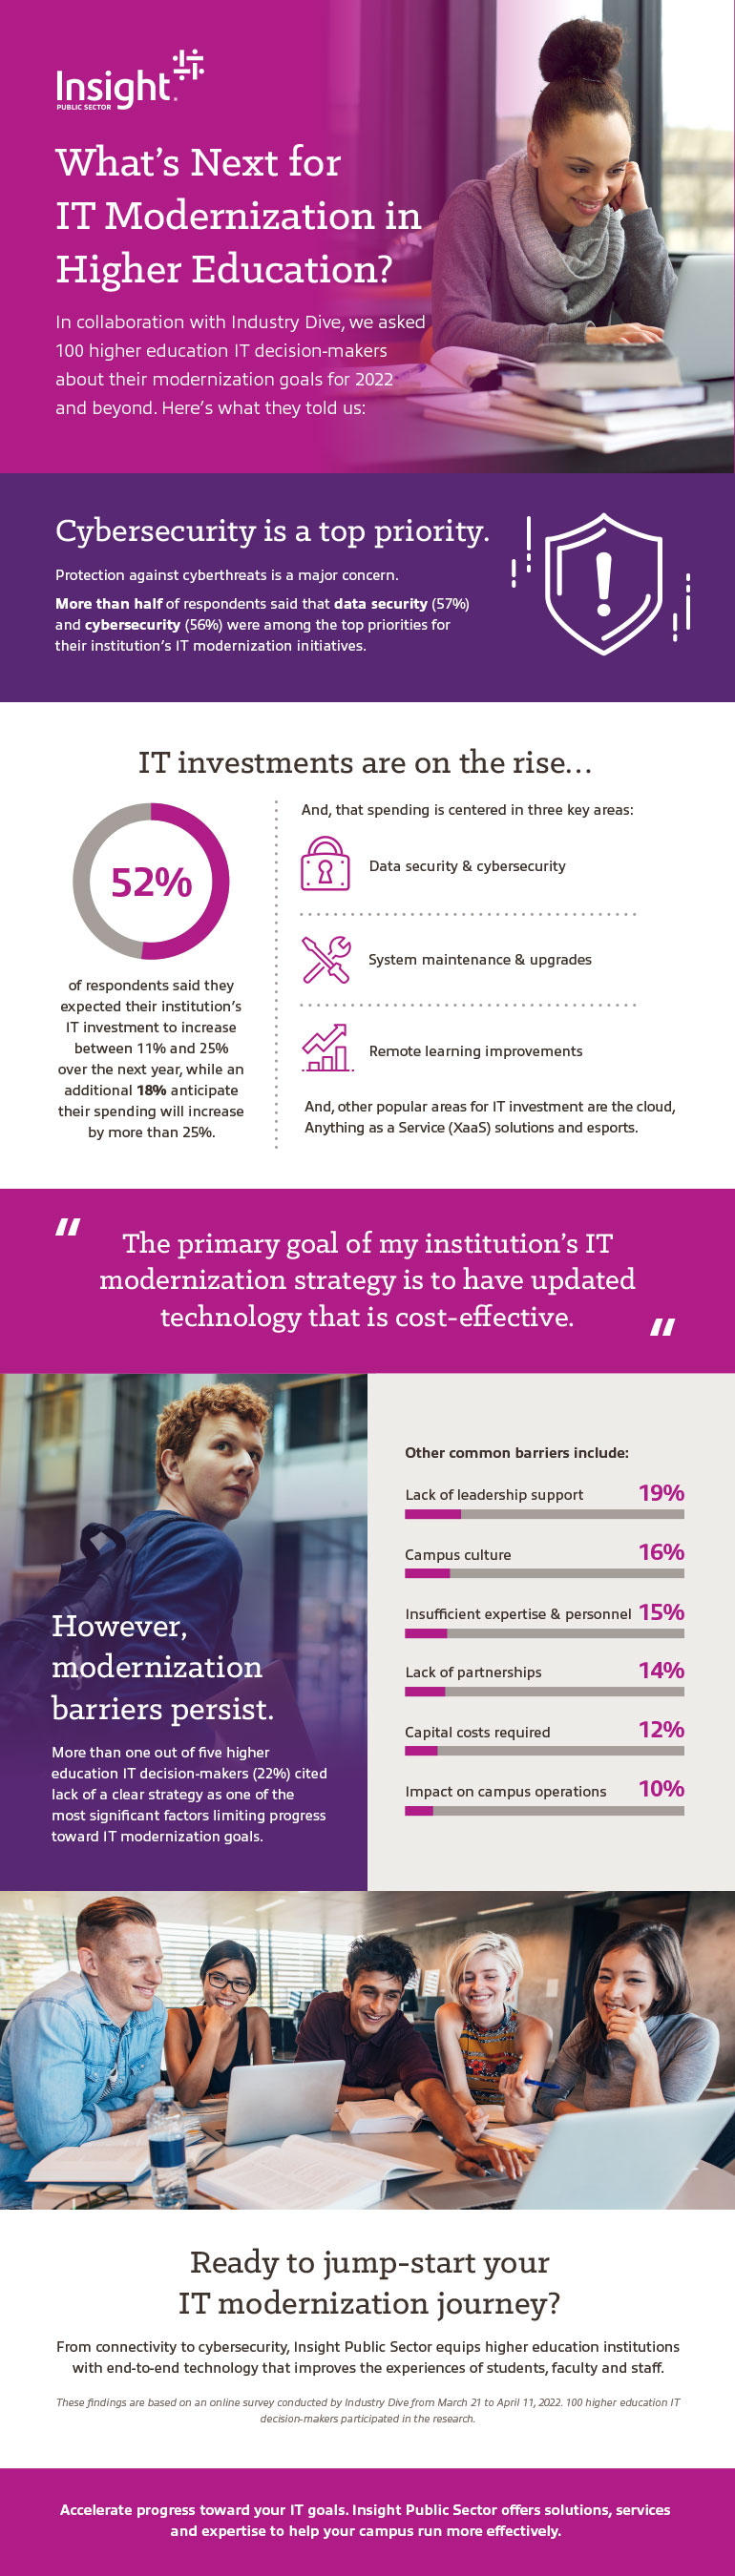 Our Higher Education Survey Results infographic transcribed below